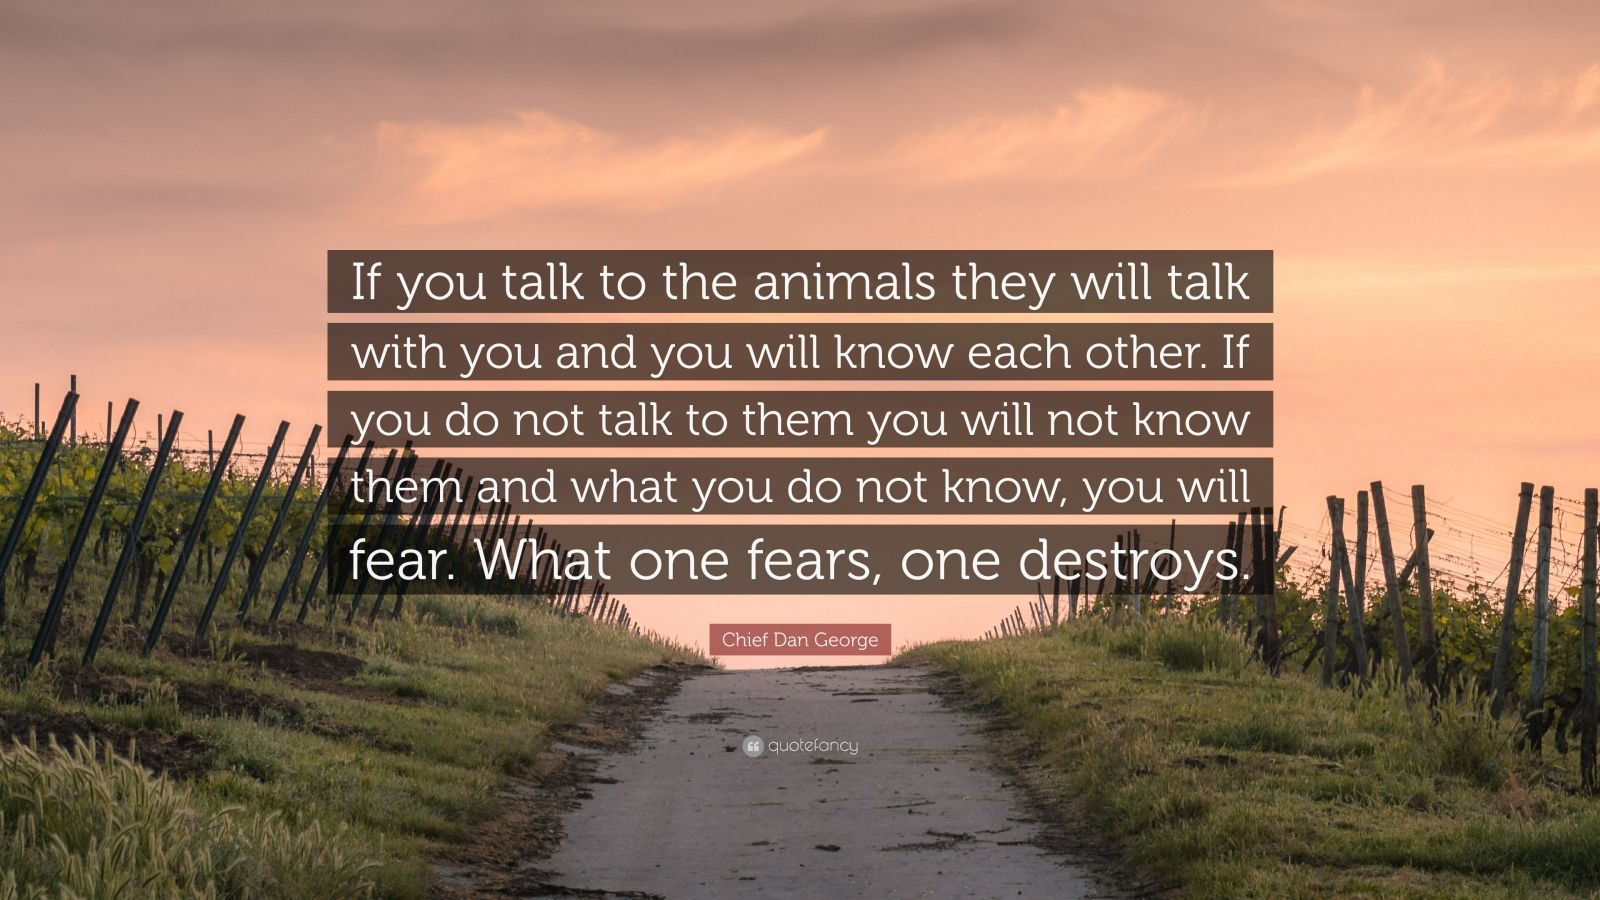 Chief Dan George Quote: "If you talk to the animals they ...